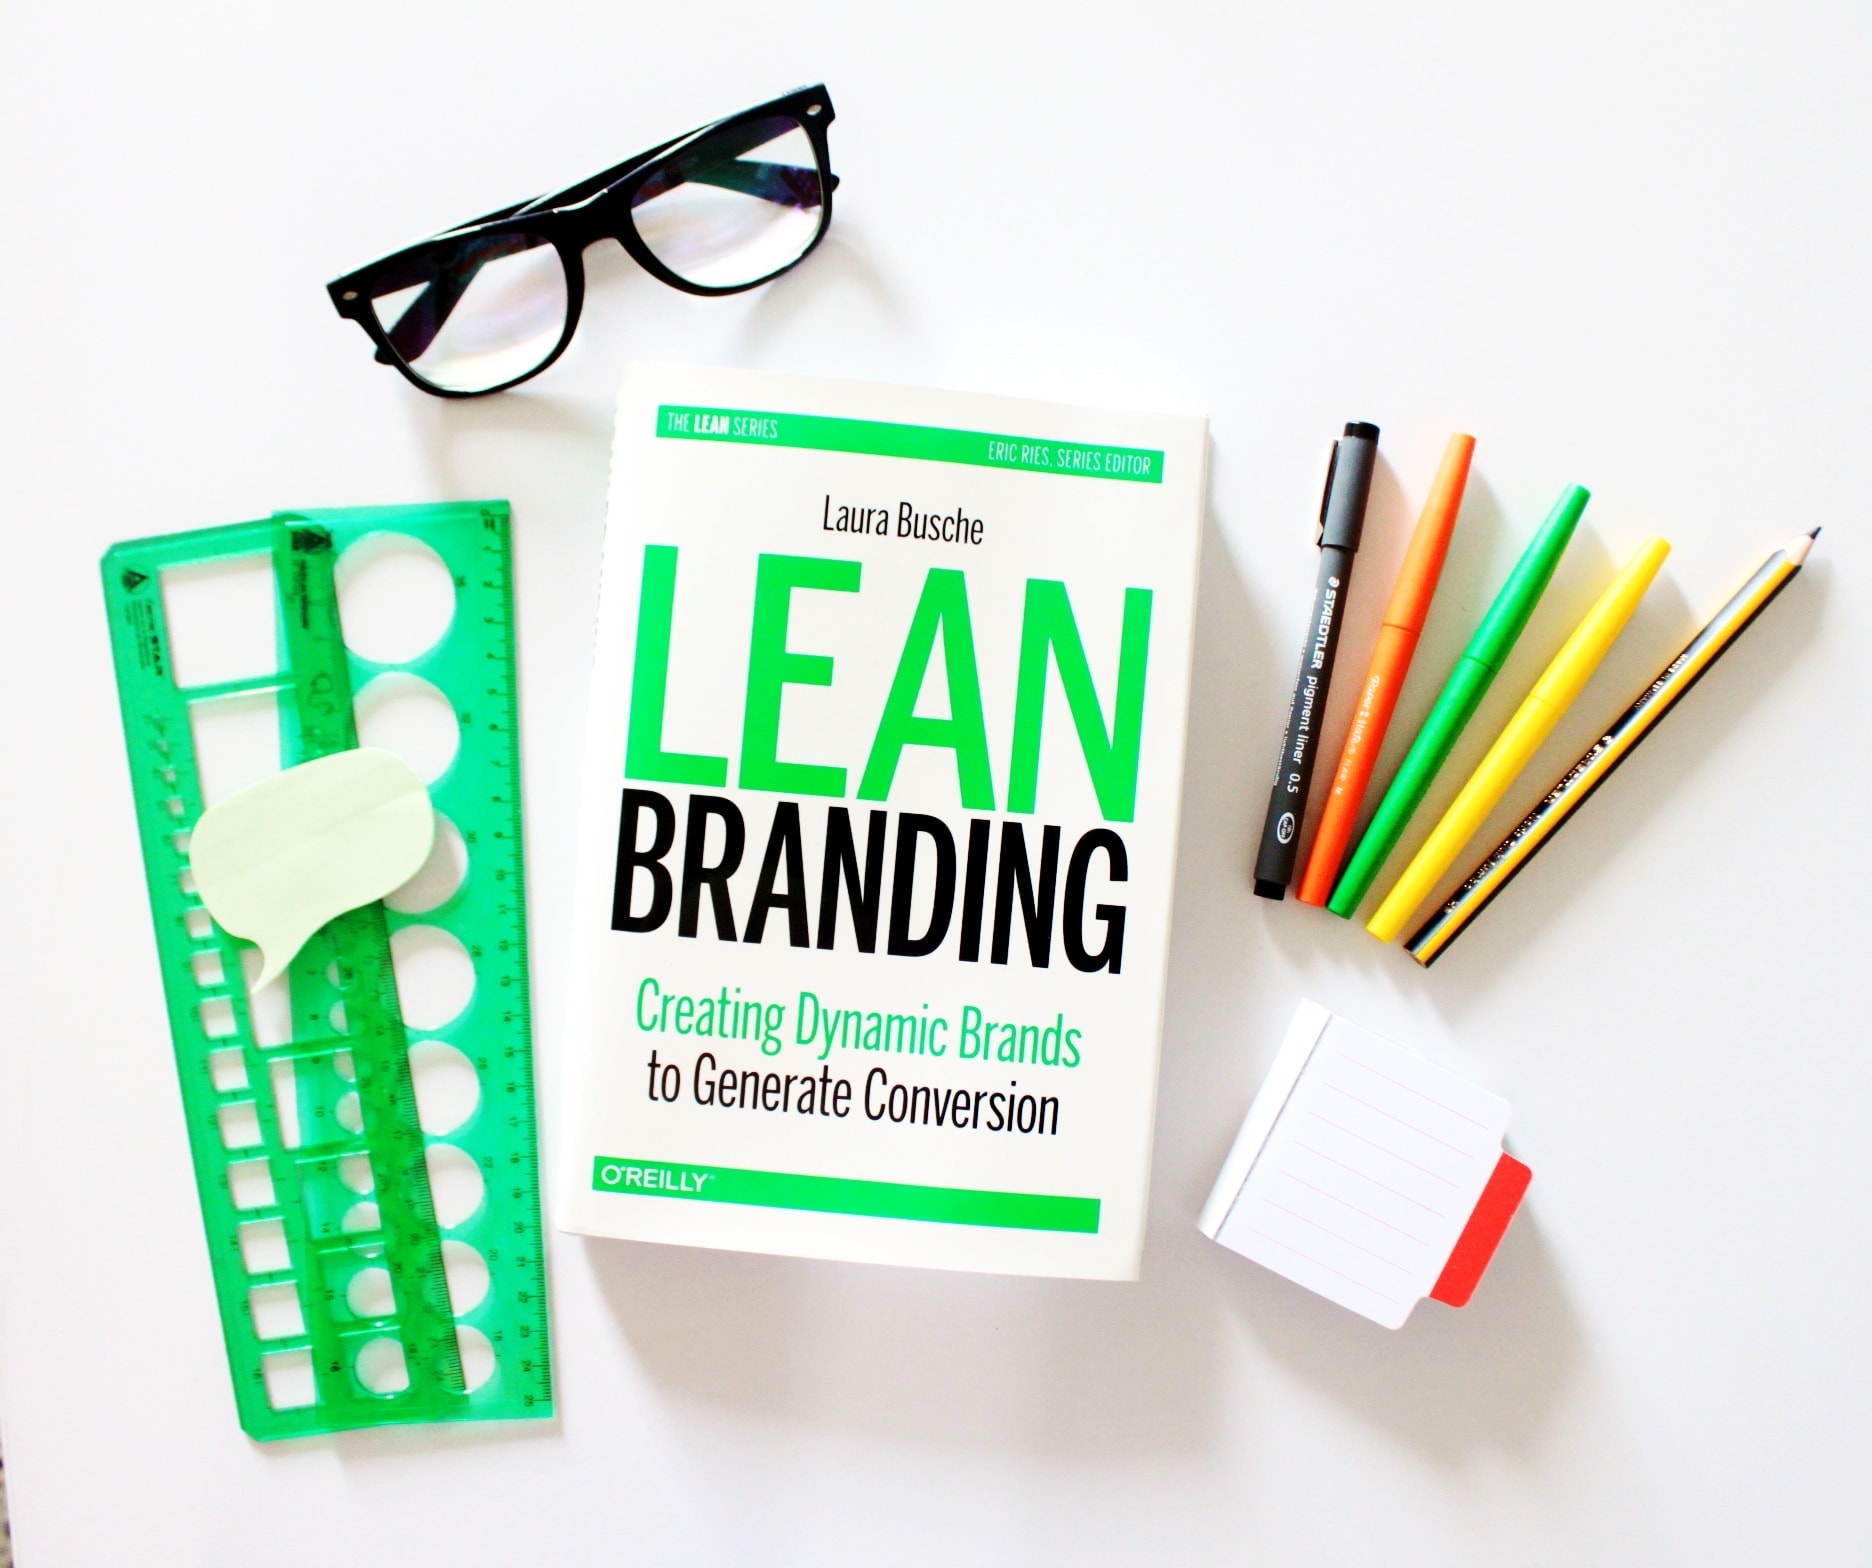 The Lean Branding book is out!